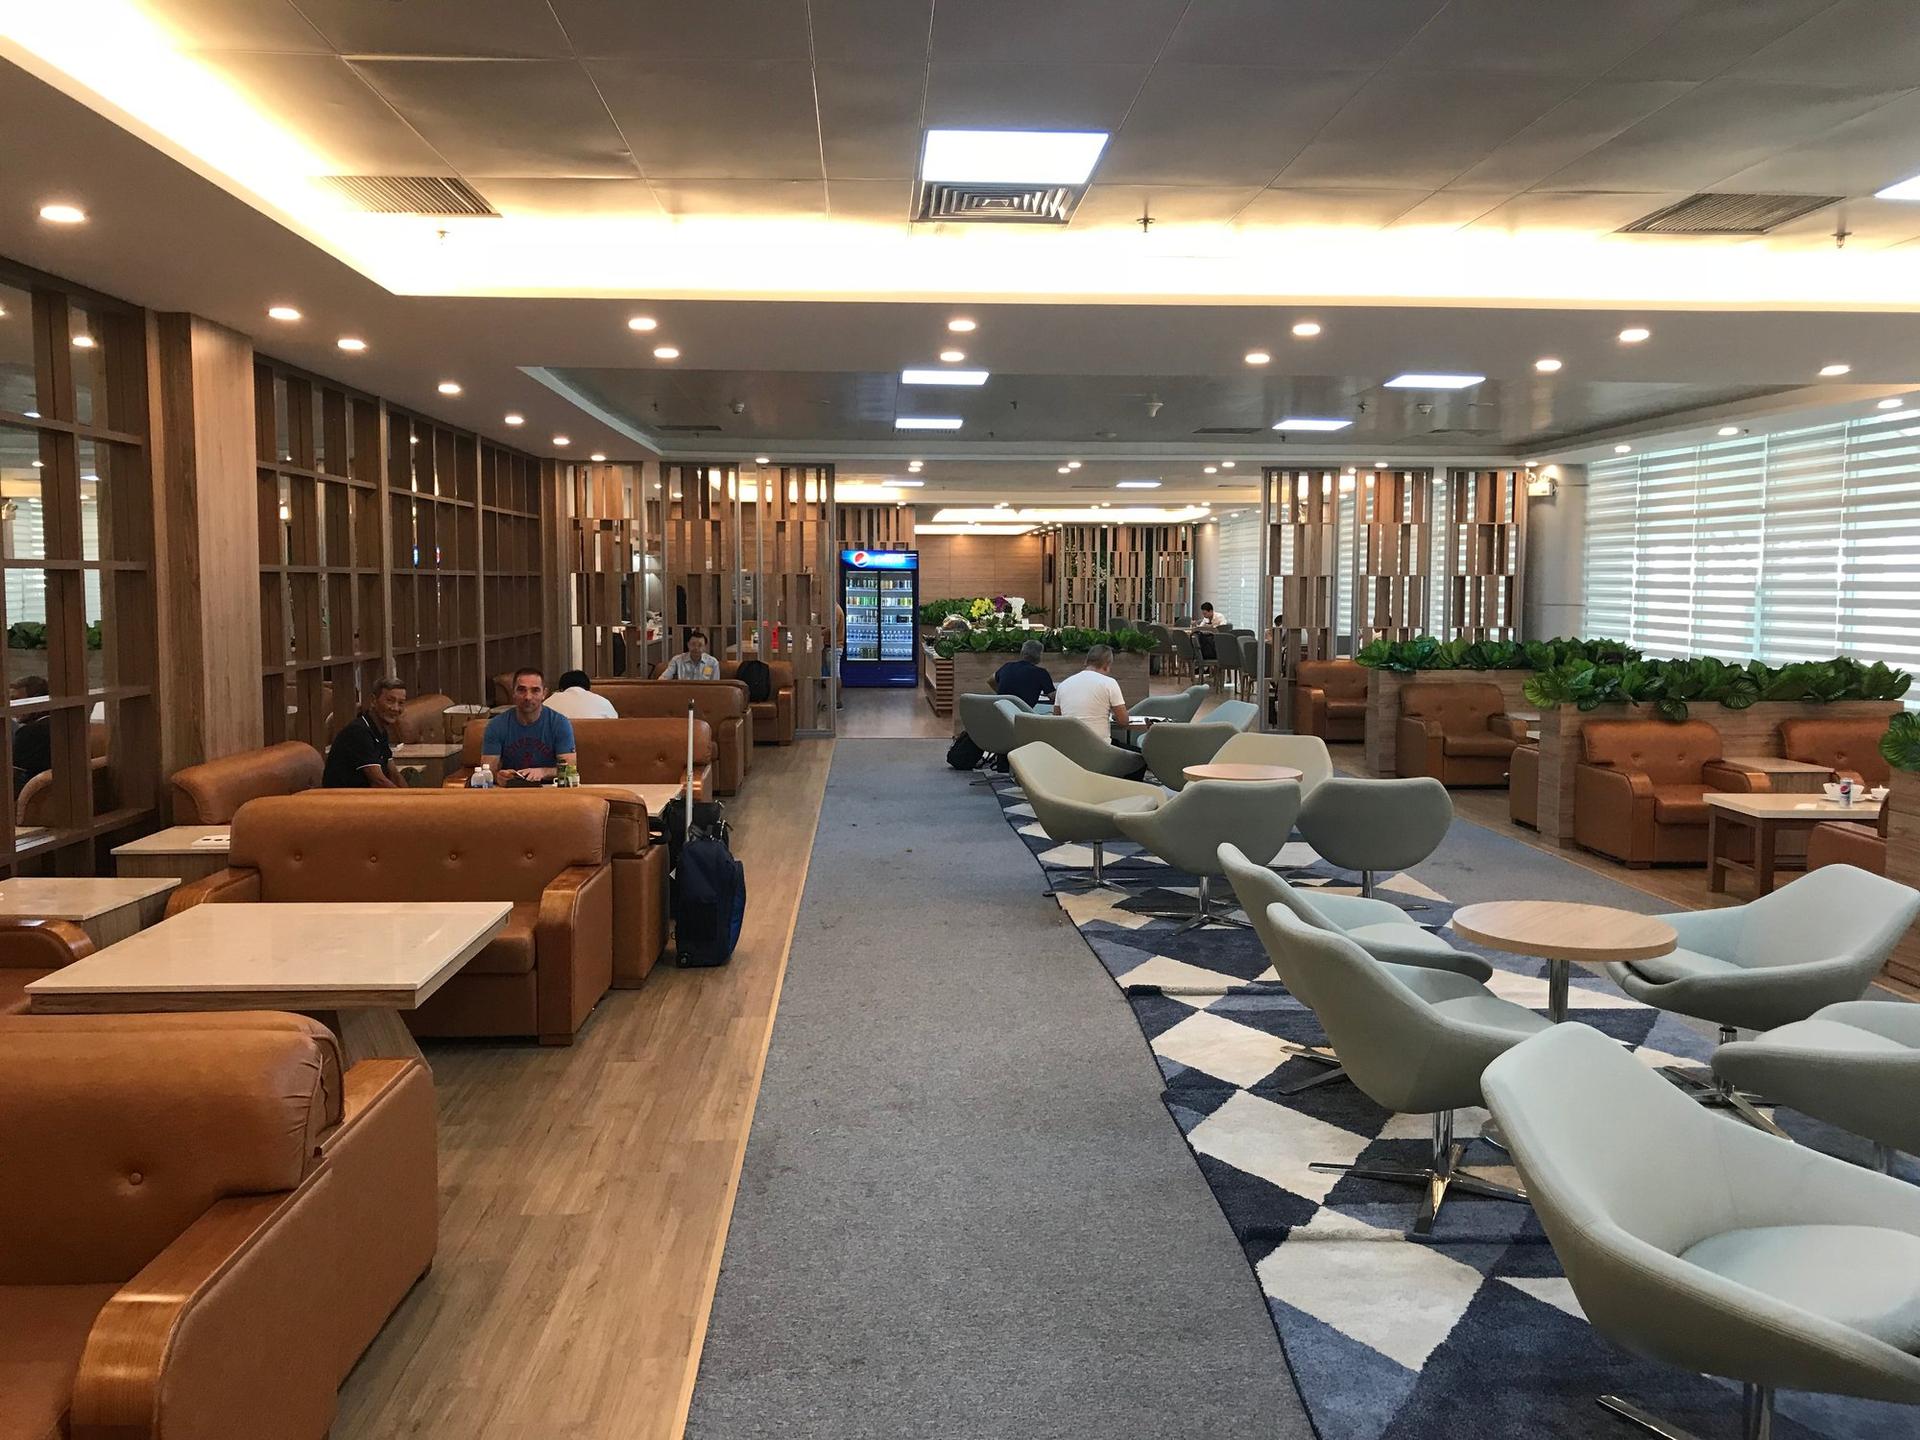 Vietnam Airlines Lounge (Domestic) image 4 of 11